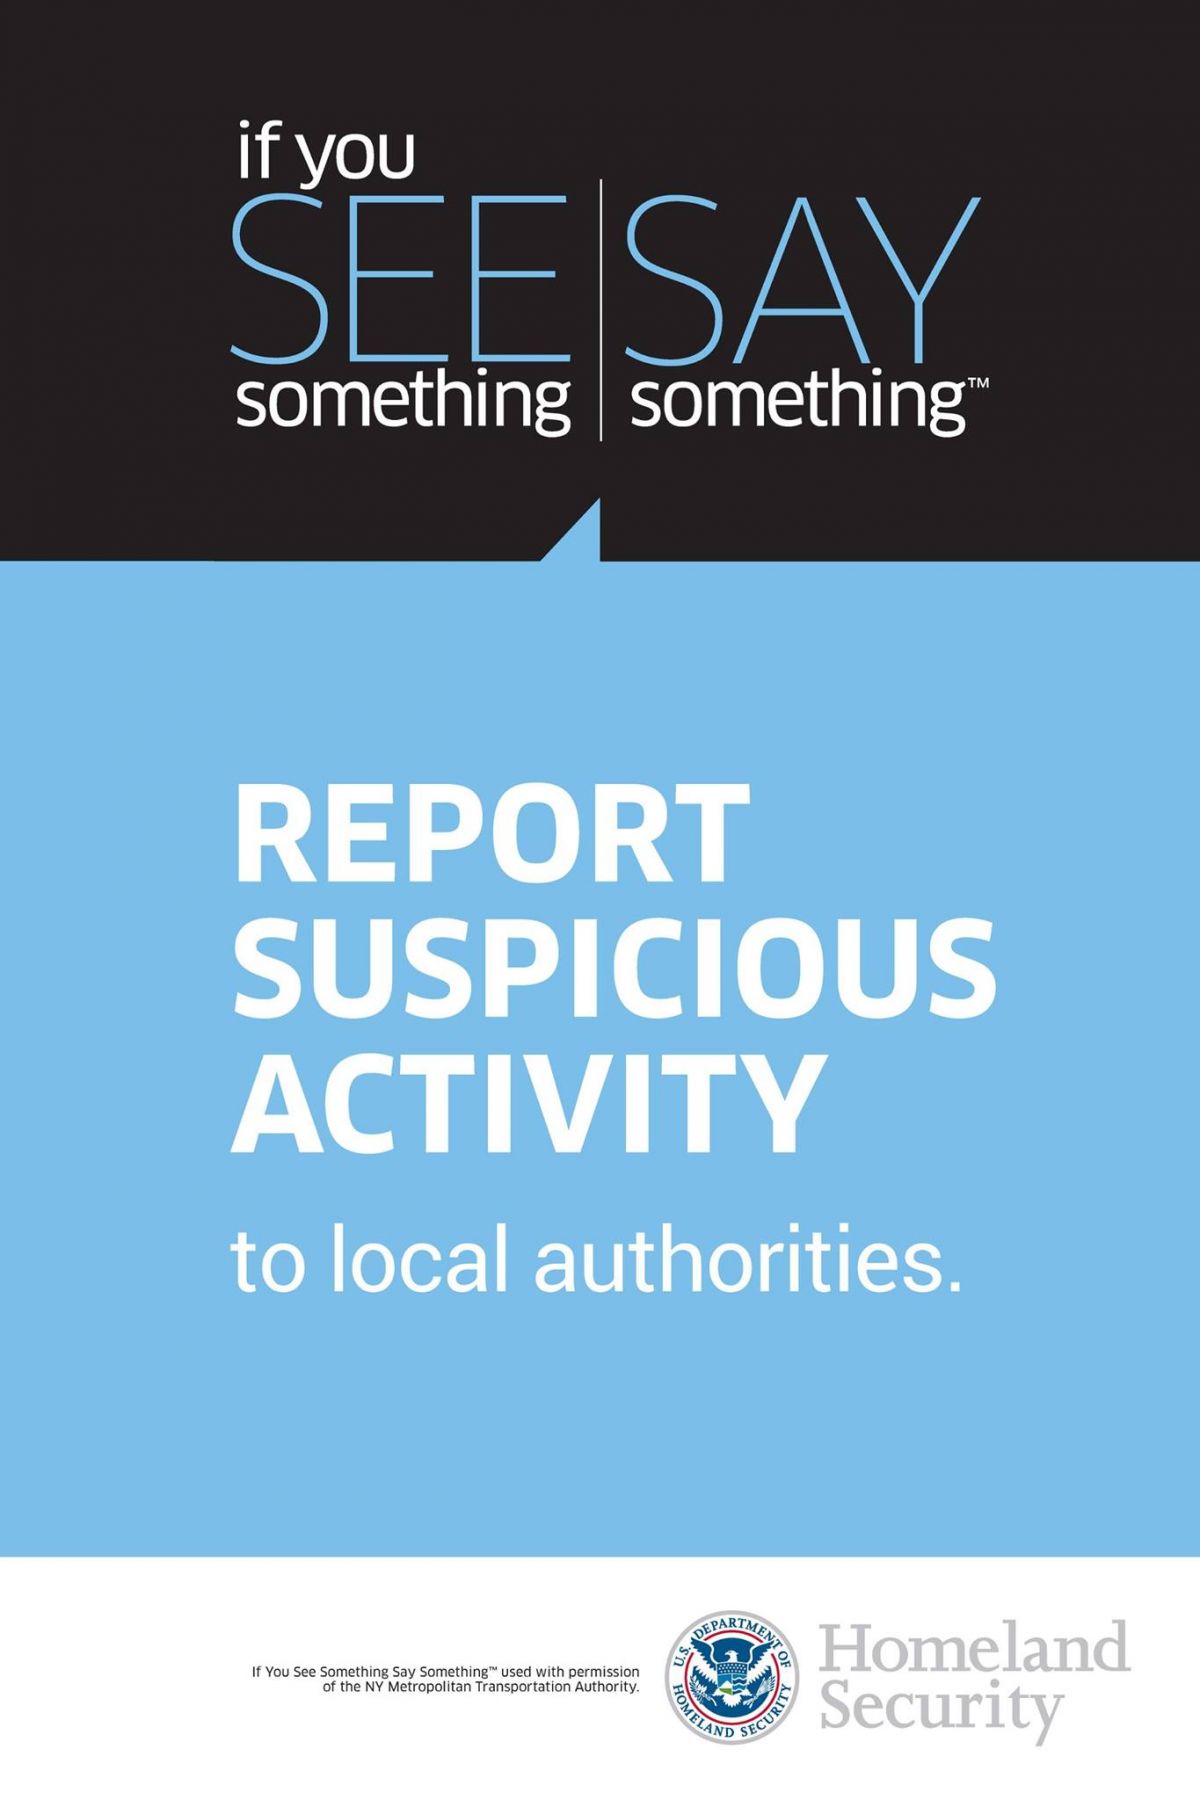 Suspicious activity. See something say something. Suspicious activity sus.